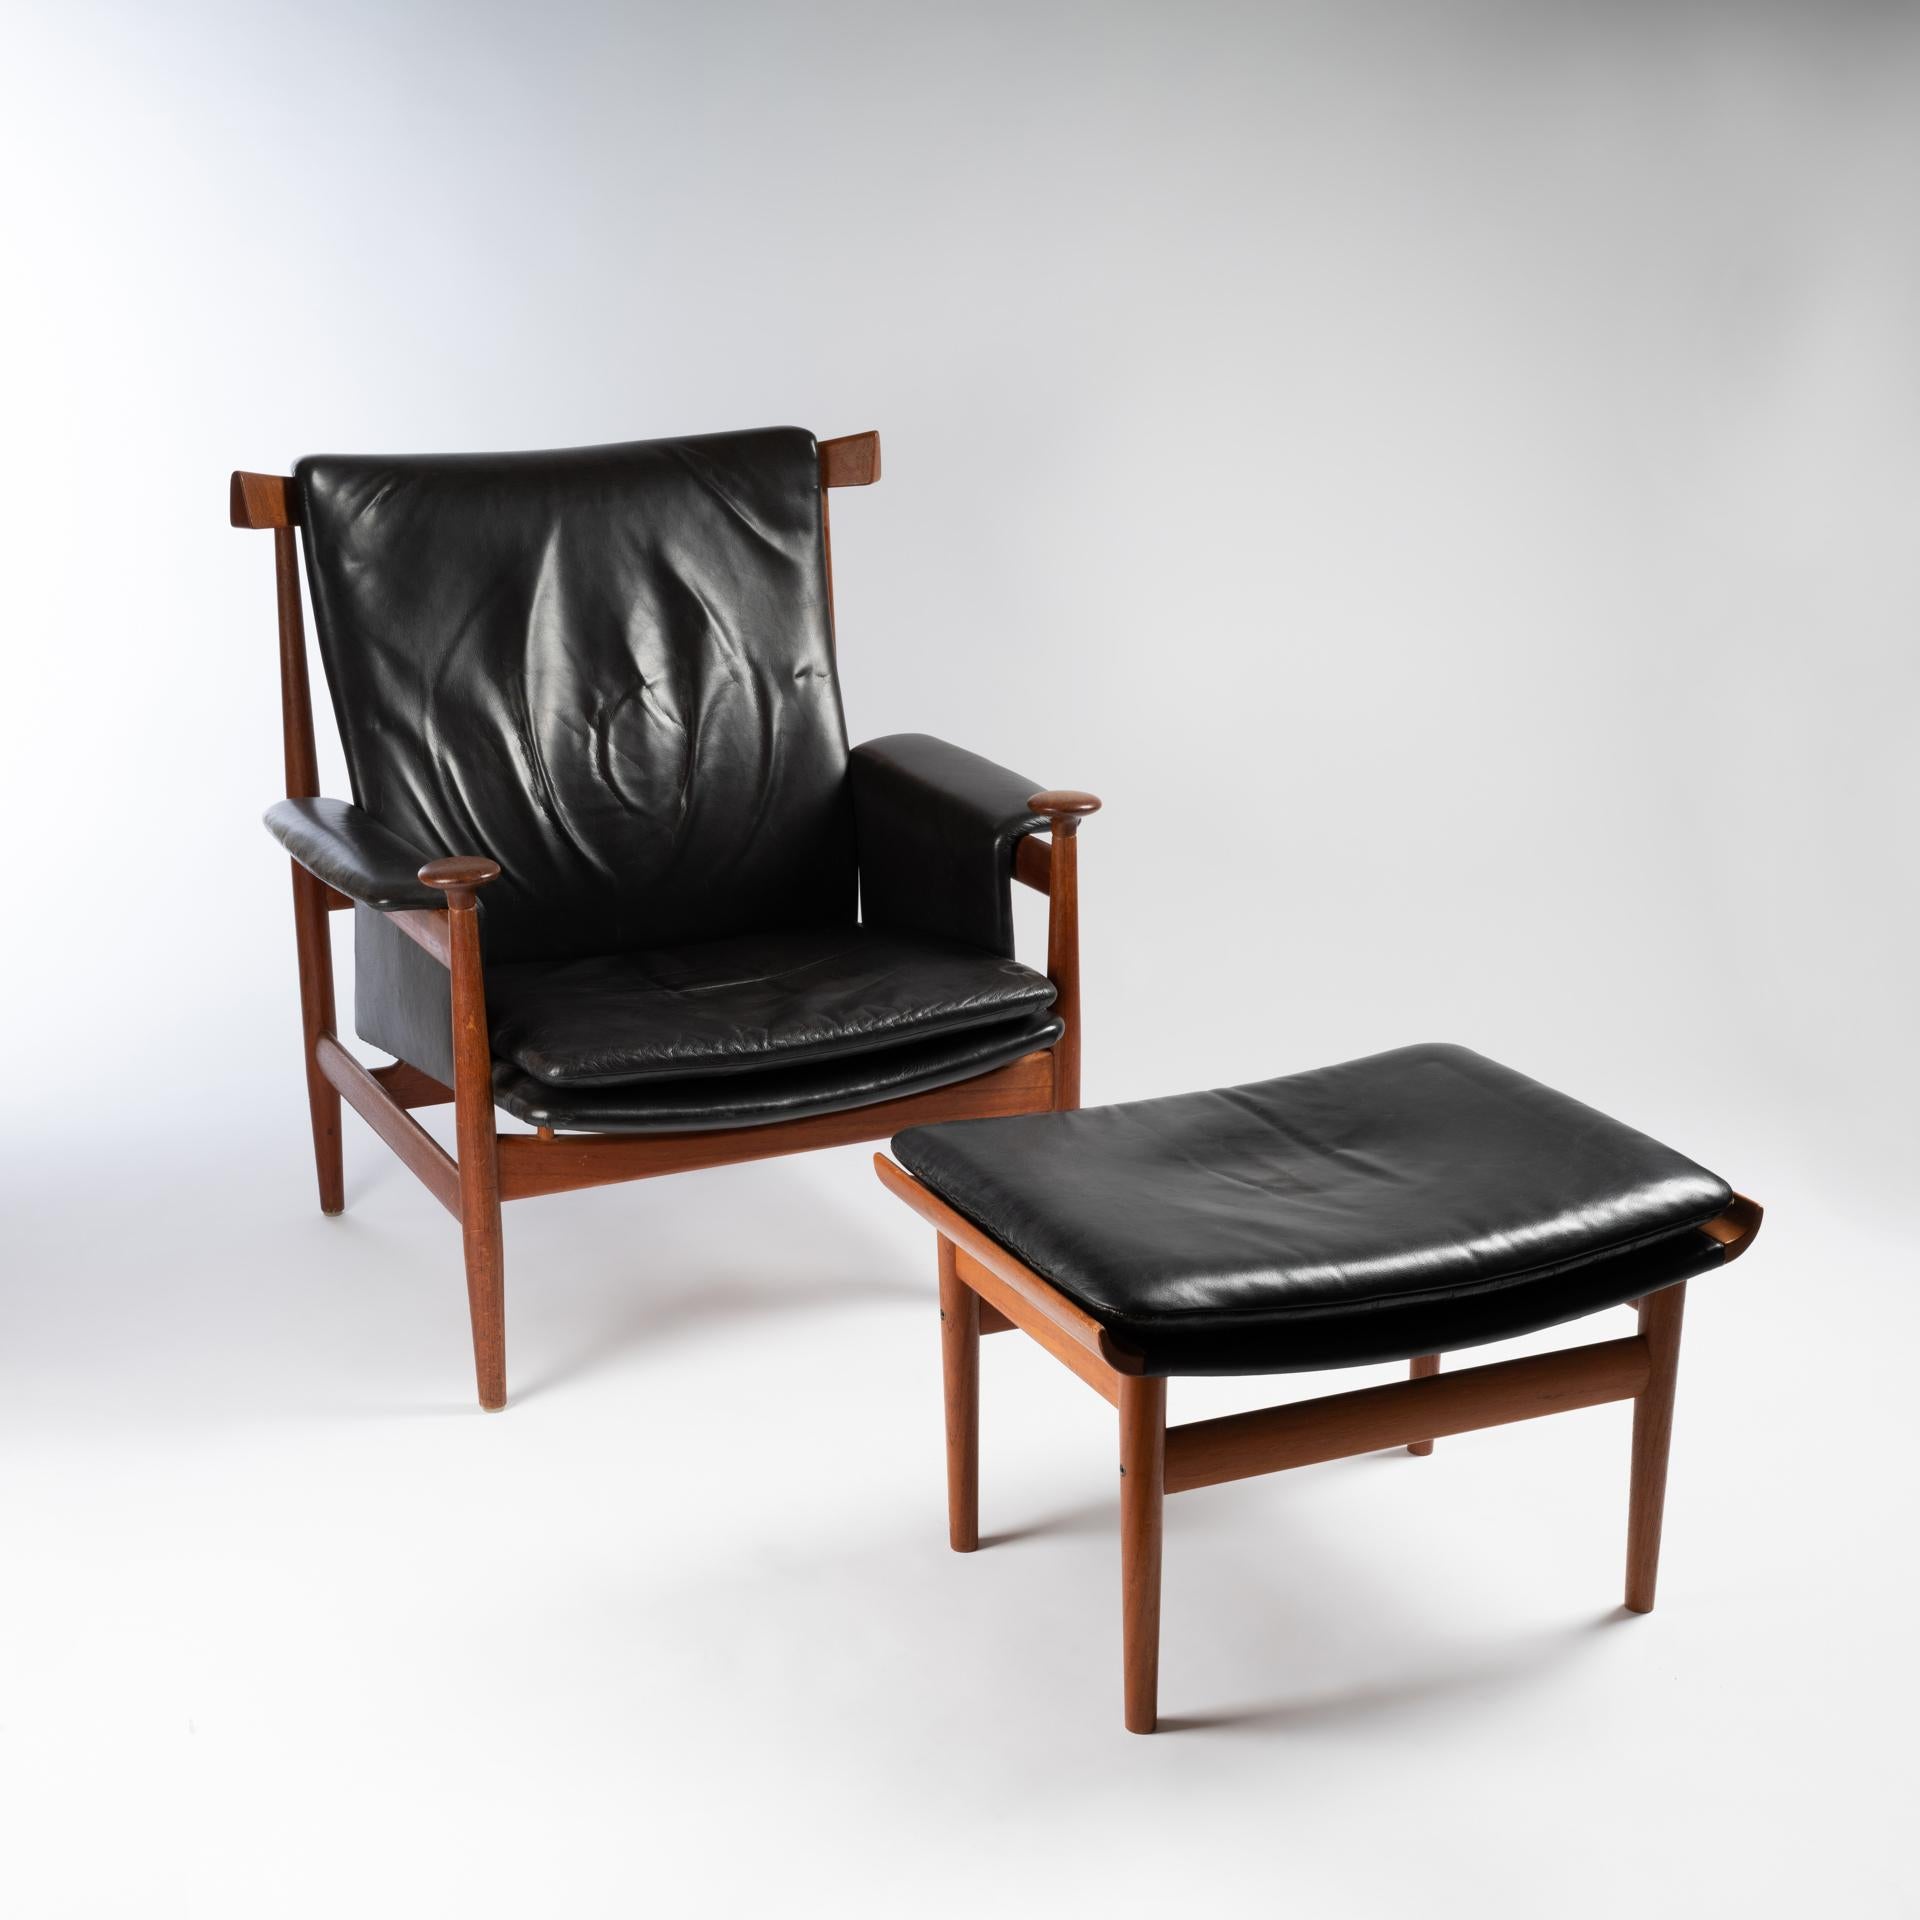 Superbly comfortable and strikingly designed, this model by master Finn Juhl was produced by France and Son in Denmark in 1962. With distinctive tassels on the front of the leather arms and an arched backrest, this chair draws on African and Asian